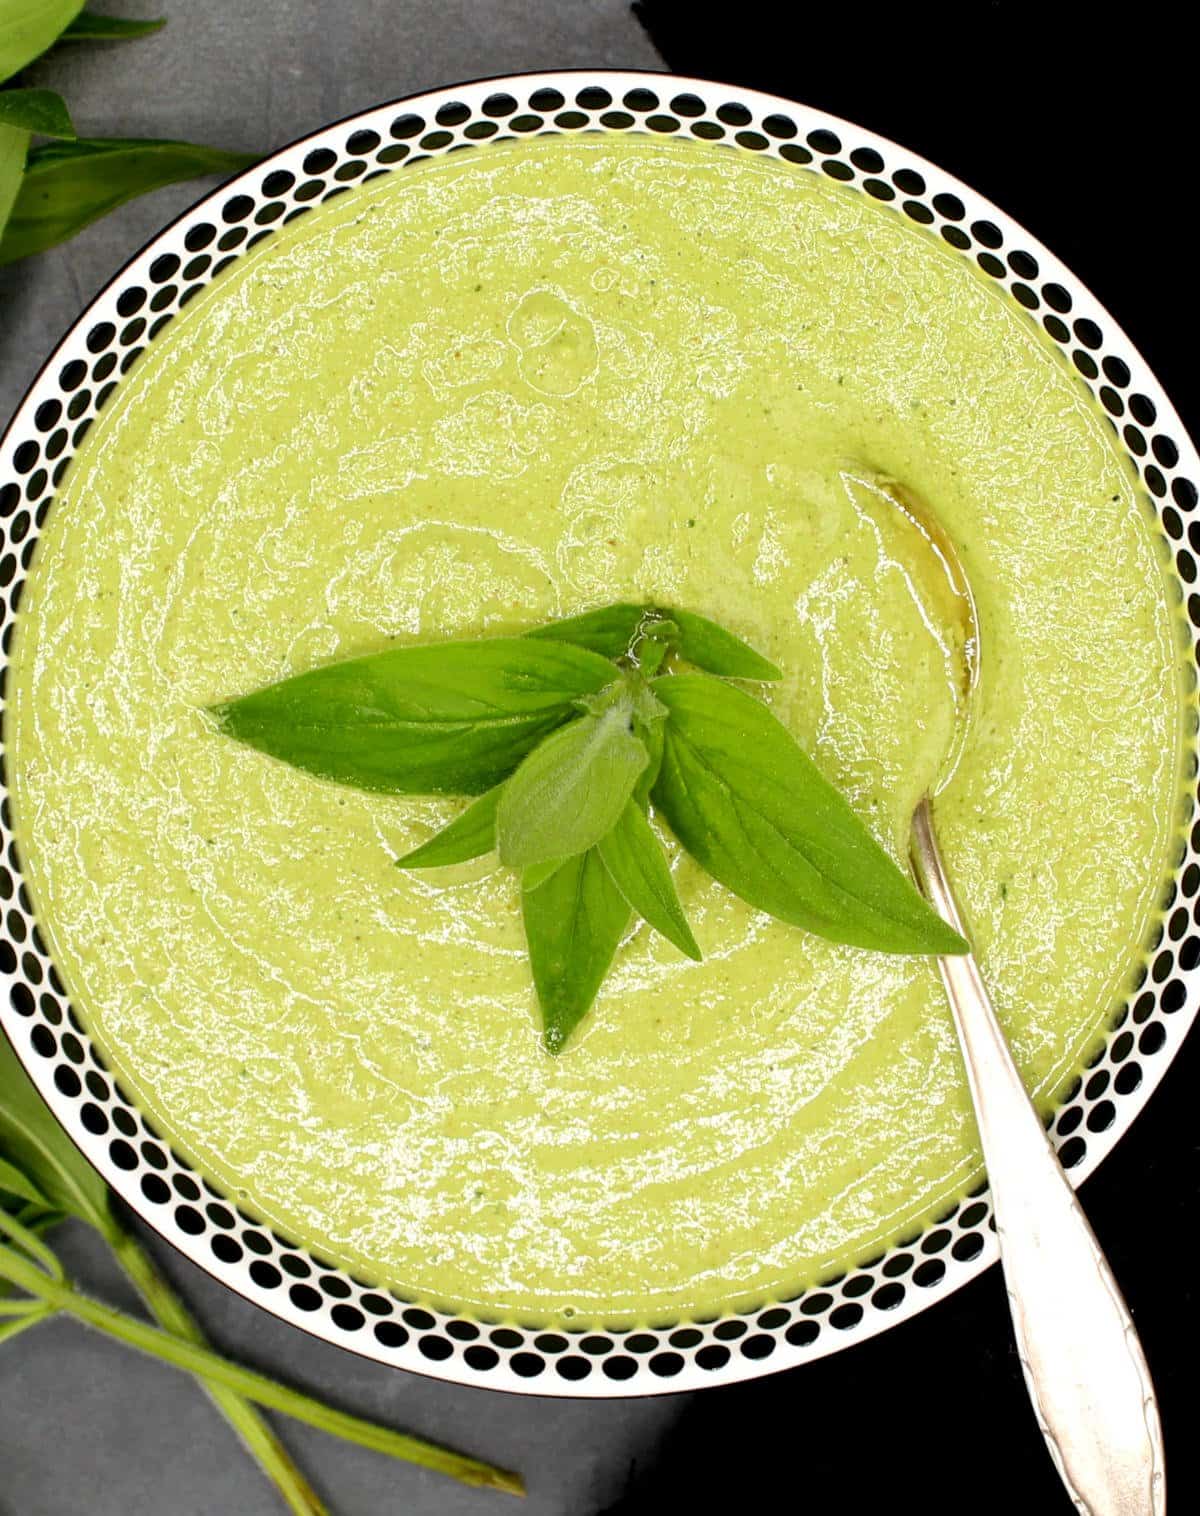 Mint chutney in a white bowl with black dots with a sprig of mint and a spoon.